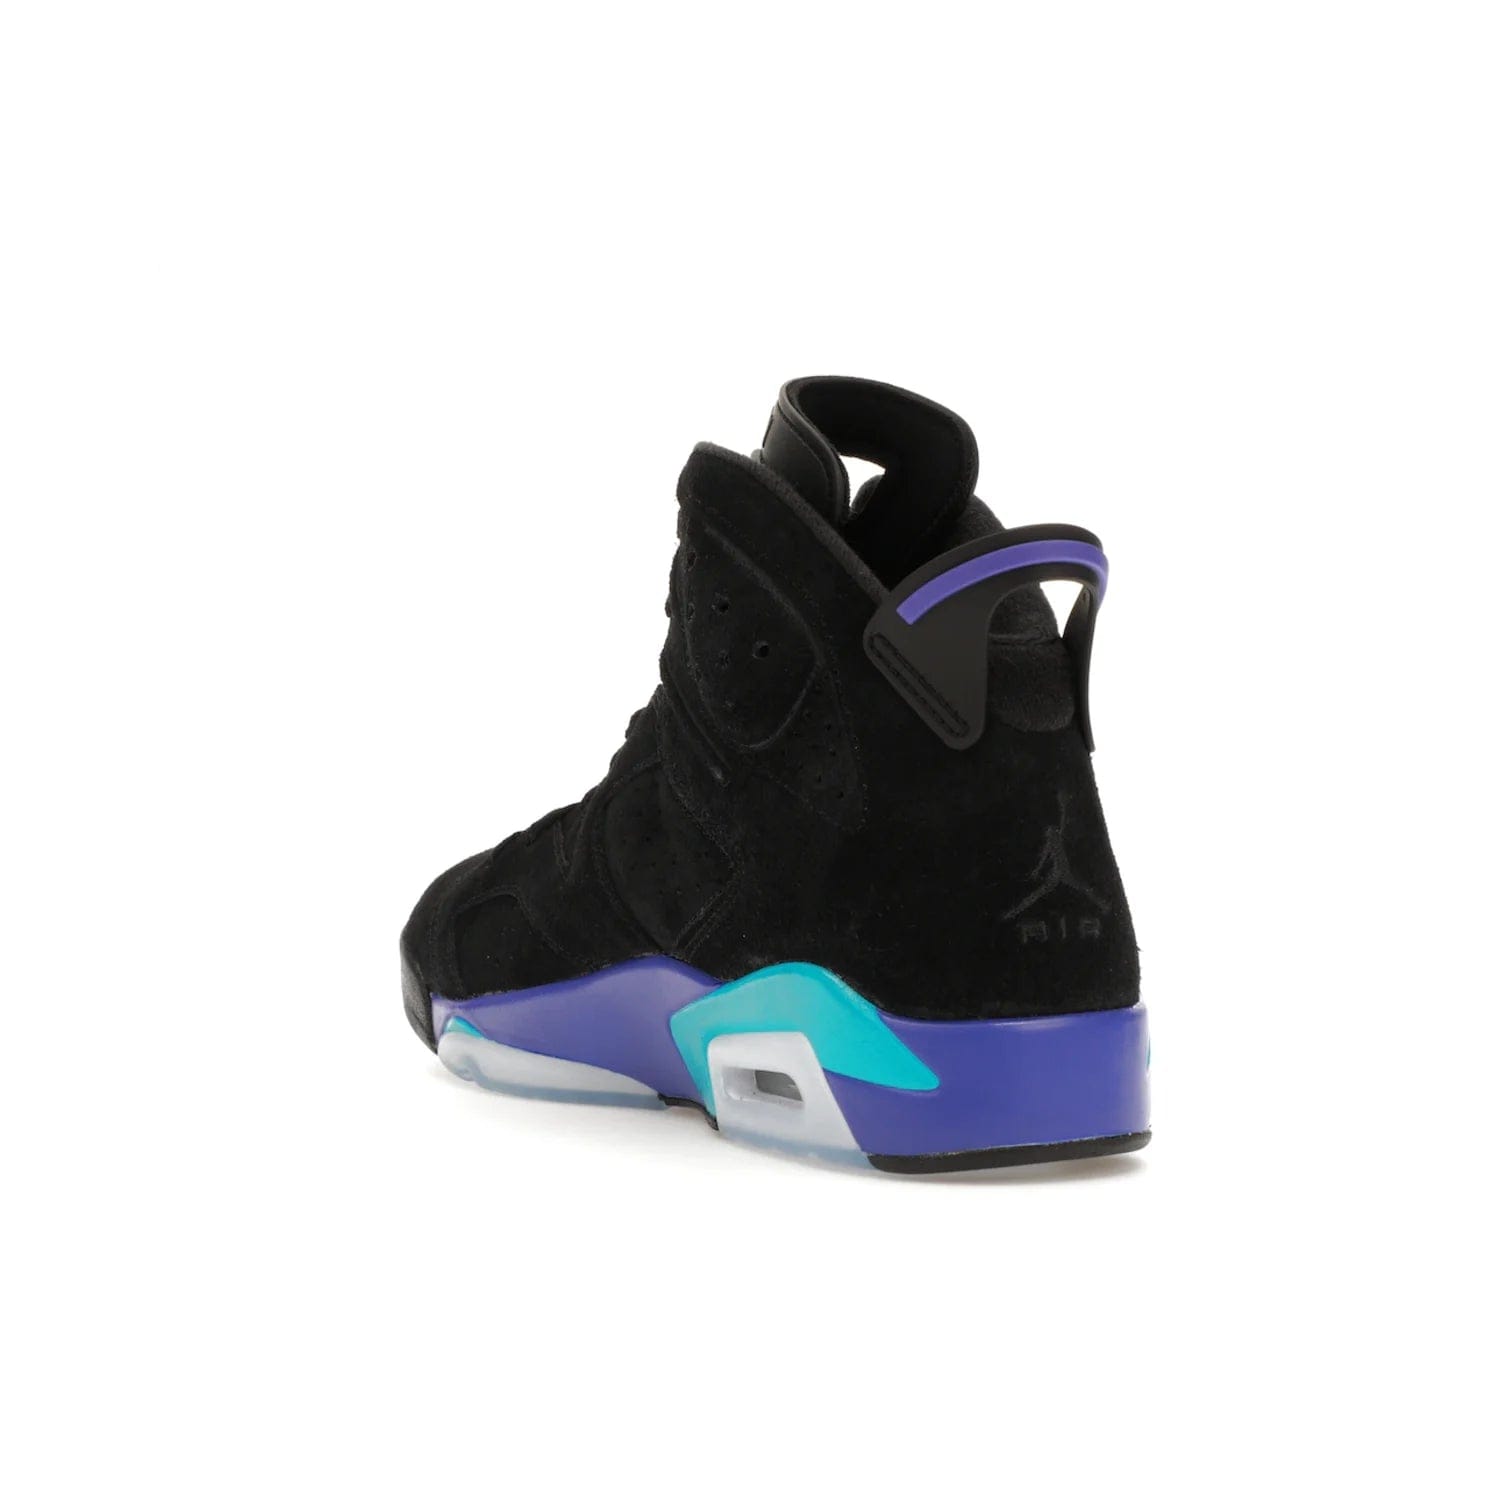 Jordan 6 Retro Aqua - Image 25 - Only at www.BallersClubKickz.com - Feel the classic Jordan 6 Retro Aqua paired with modern style. Black, Bright Concord, and Aquatone hues are crafted with a supple suede and rubberized heel tab. This standout sneaker adds signature Jordan elements at $200. Elevate your style with the Jordan 6 Retro Aqua.